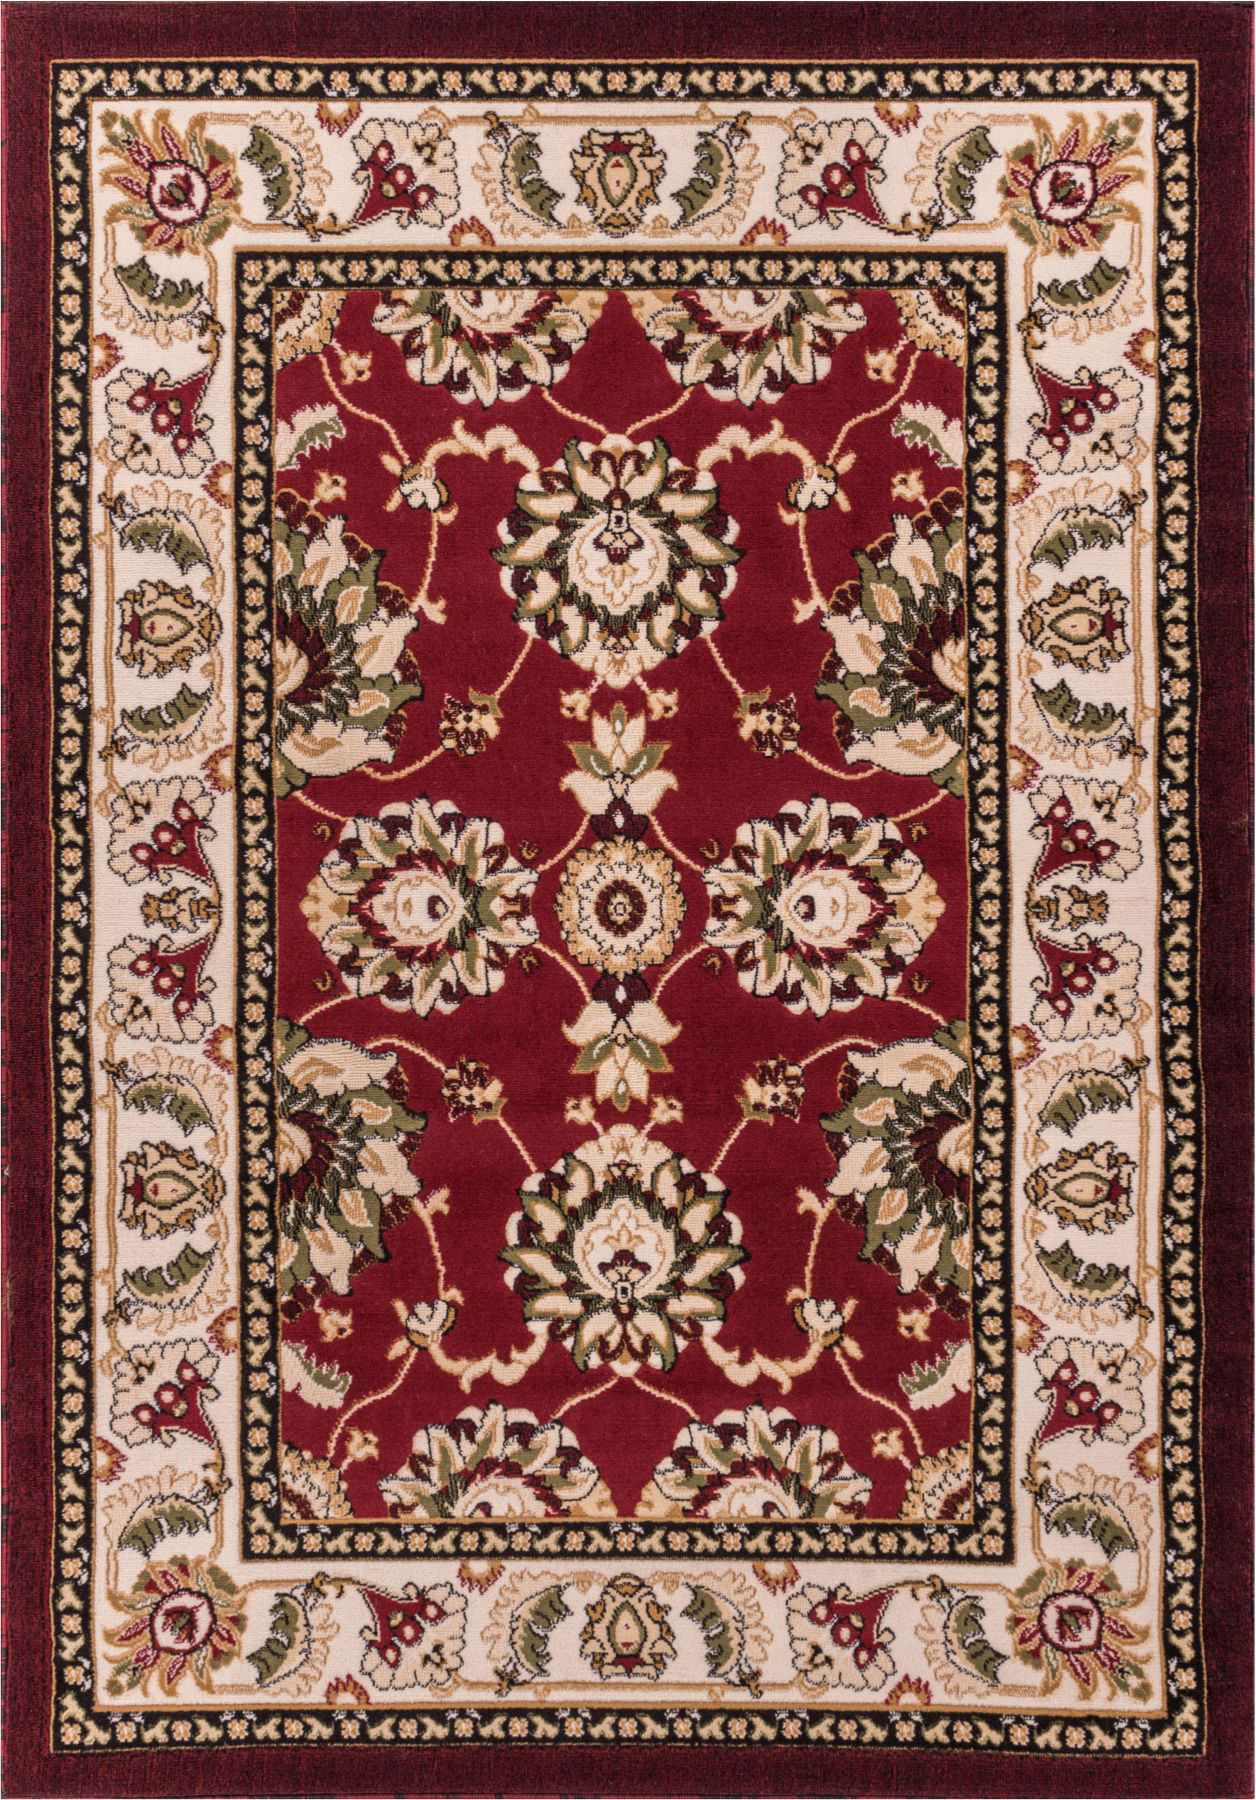 New Classic Persian Look Soft Pile BCF Floor Rug Carpet All Sizes 